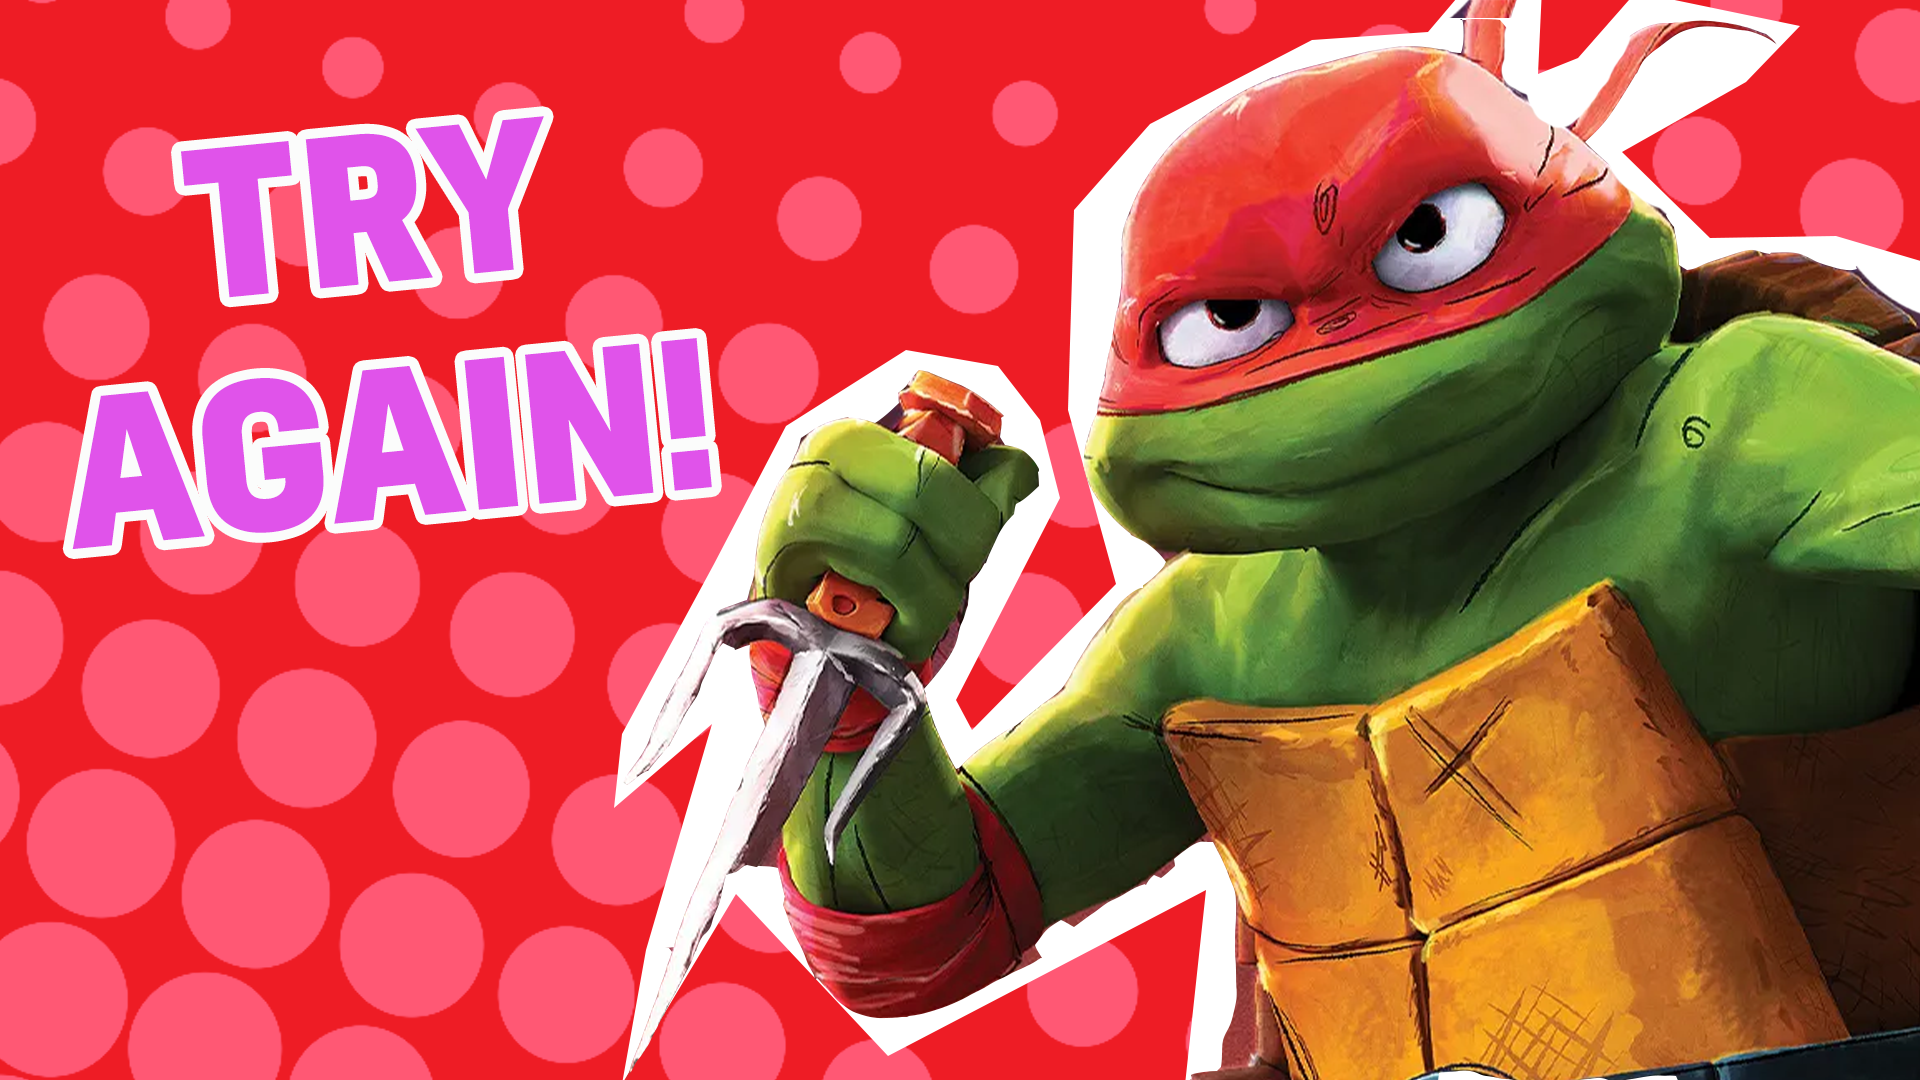 Not bad, but we know you know about the TMNT universe than that! Try again and see if you score higher!